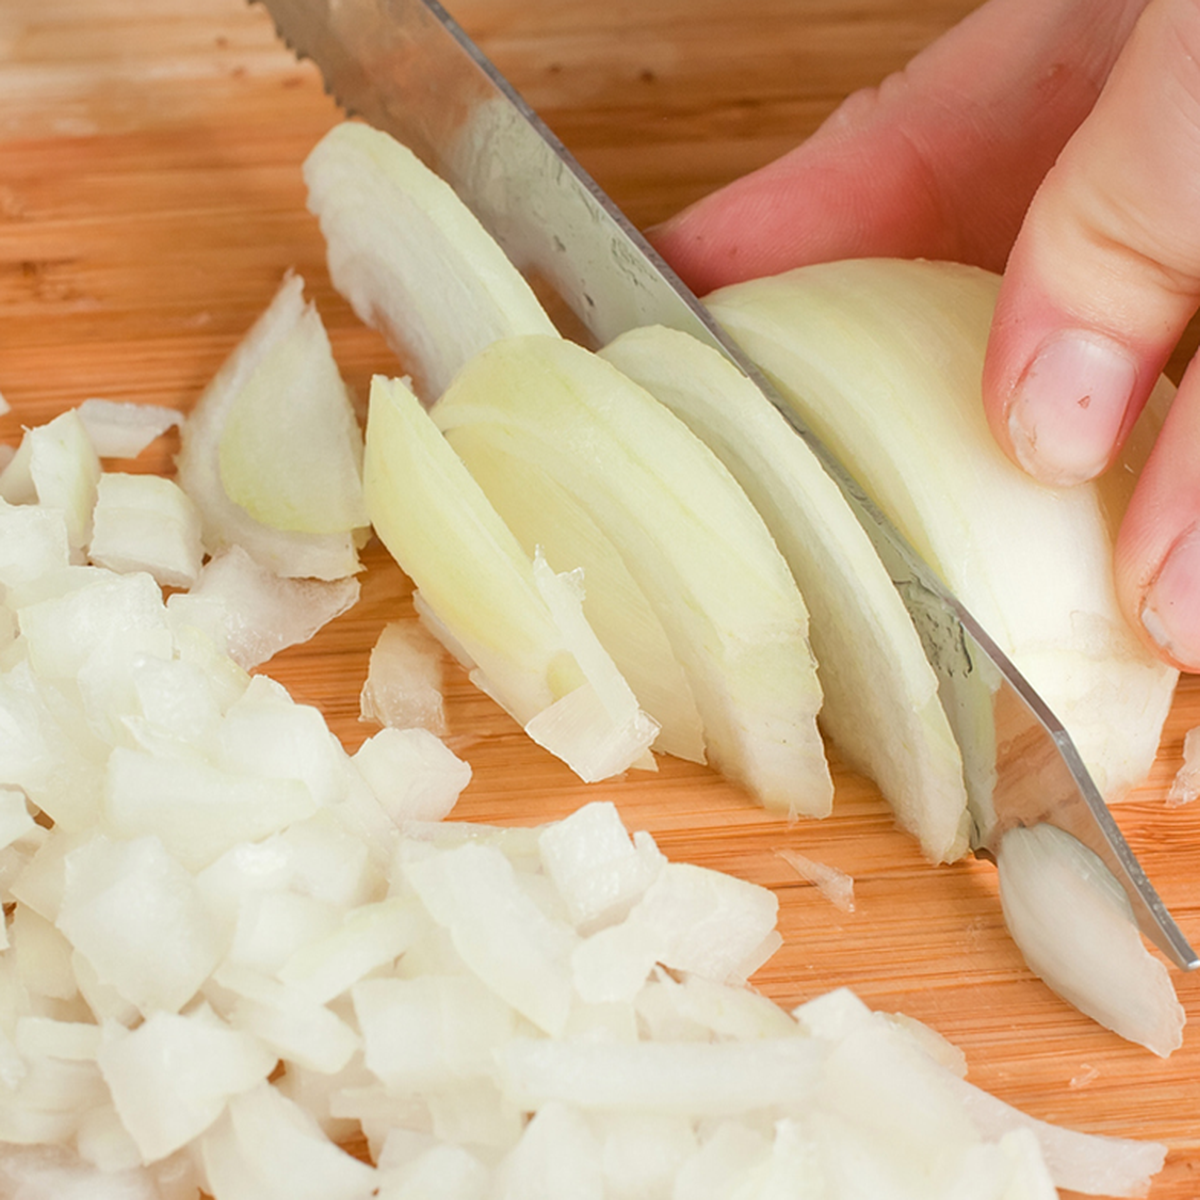 TikTok chef's 'genius' onion chopping hack can create thin slices in  seconds